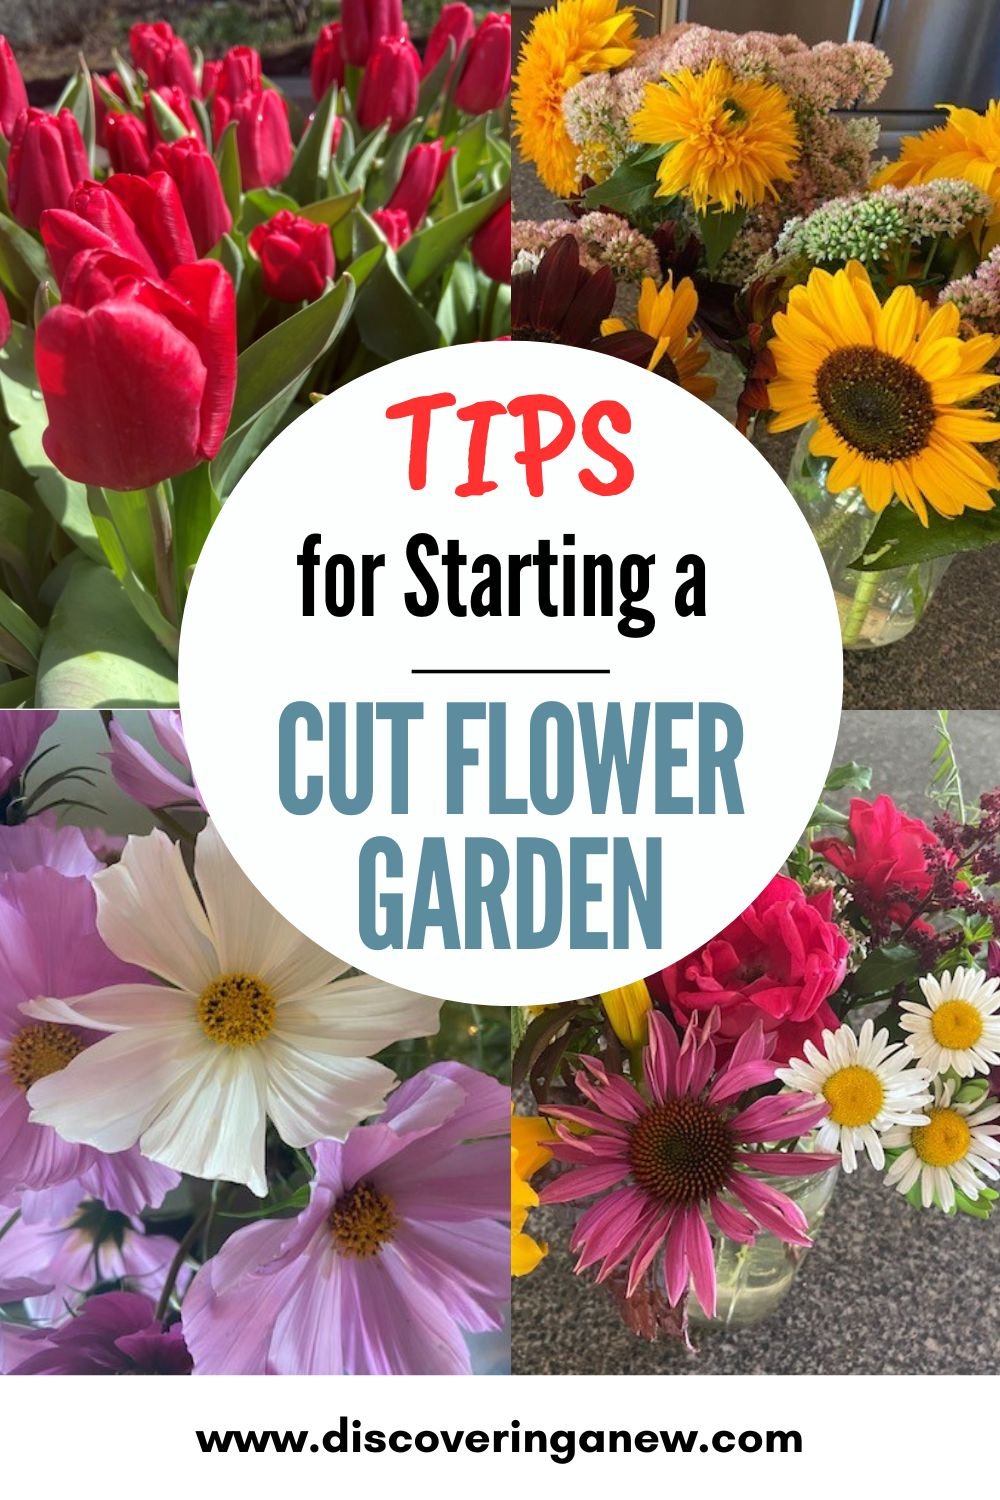 The Guide to Harvesting Garden Flowers at Their Peak Bloom